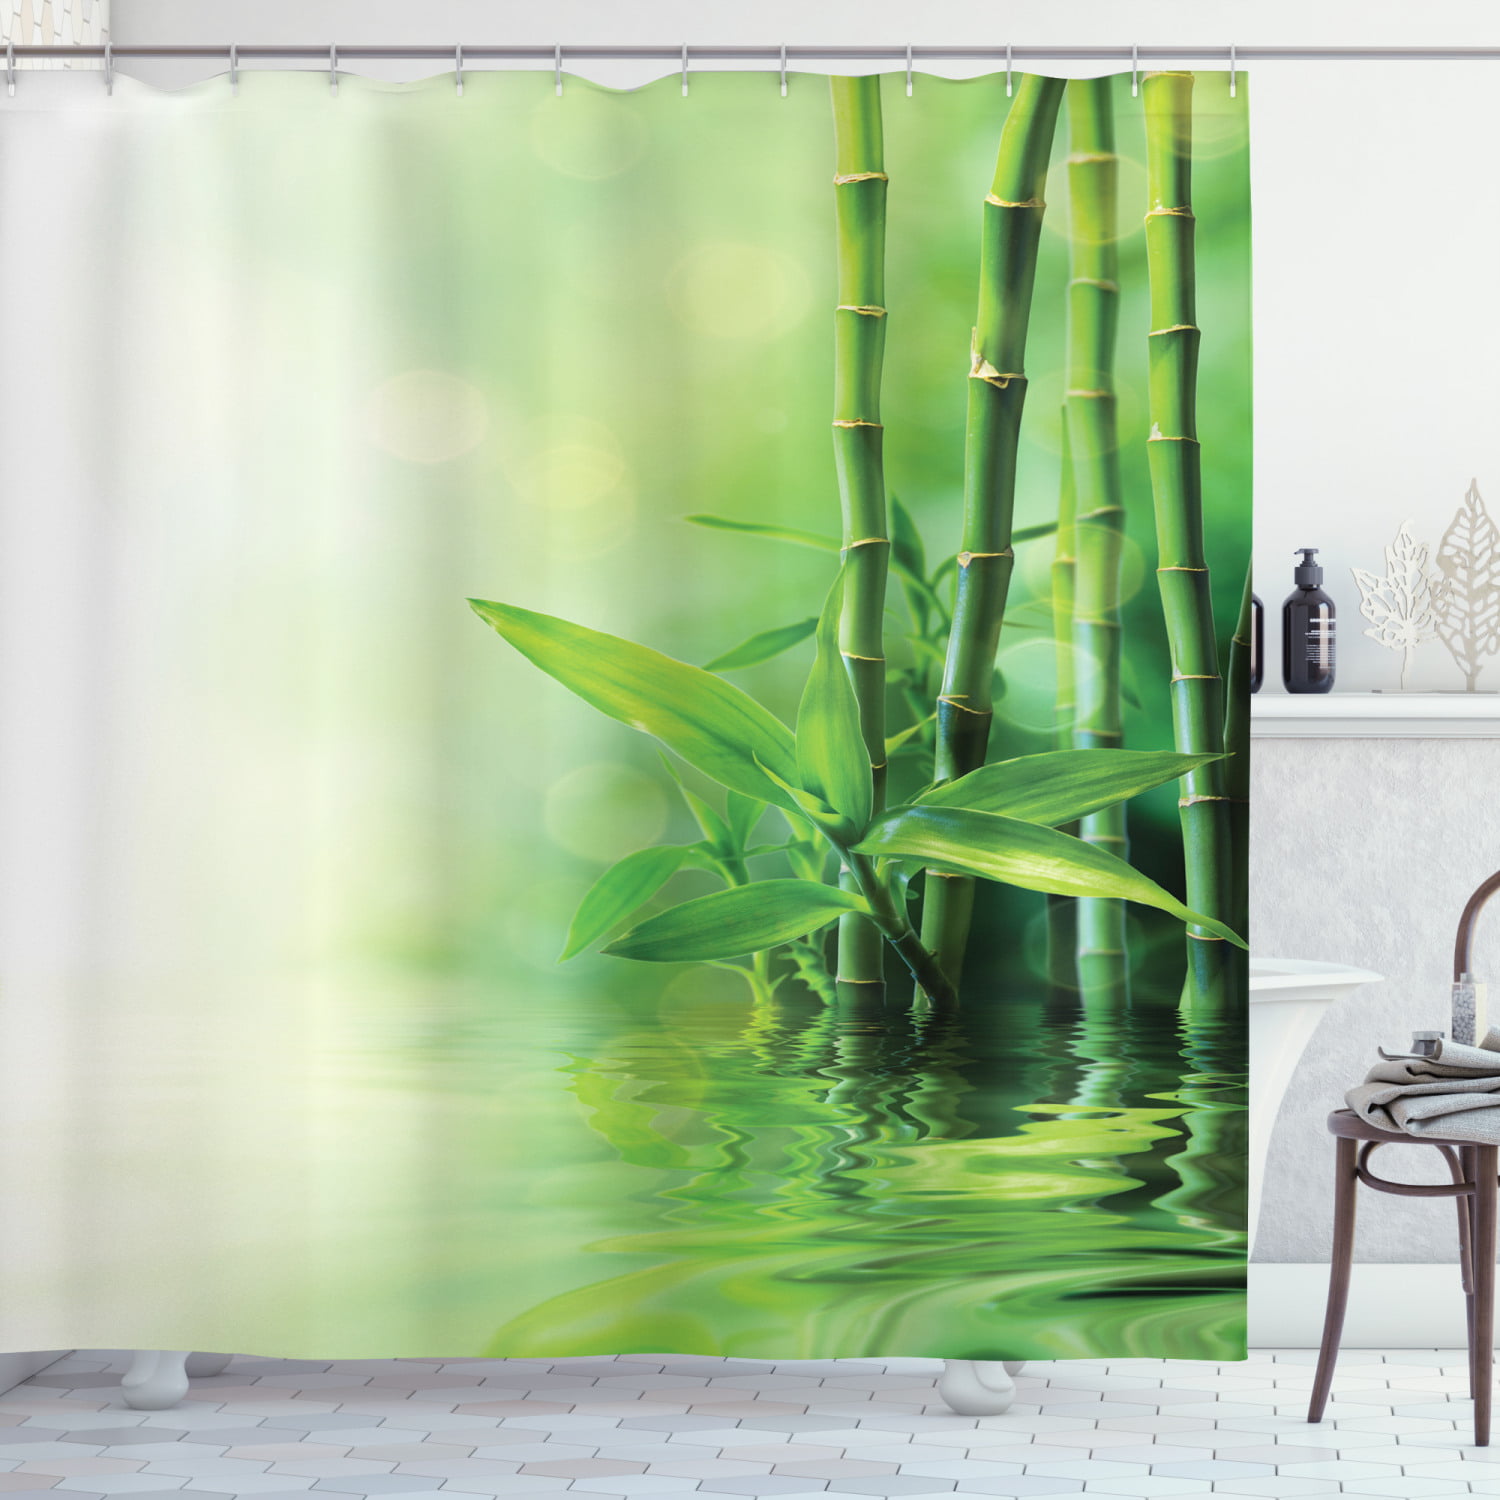 Bird Flying In Bamboo Forest Fabric Shower Curtain Bathroom & 71*71" With Hooks 